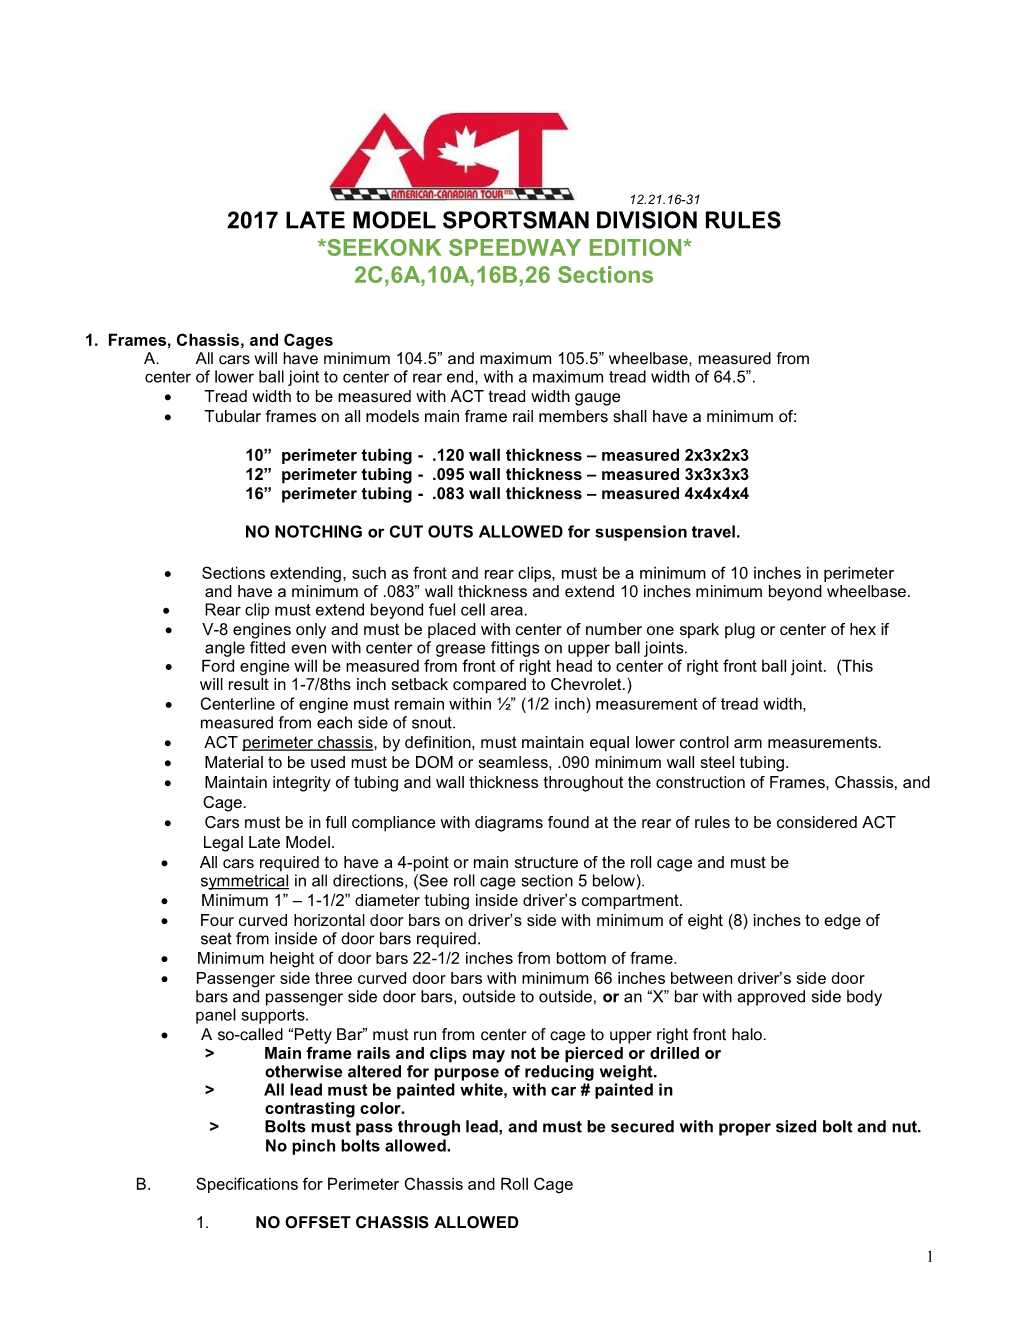 2017 LATE MODEL SPORTSMAN DIVISION RULES *SEEKONK SPEEDWAY EDITION* 2C,6A,10A,16B,26 Sections